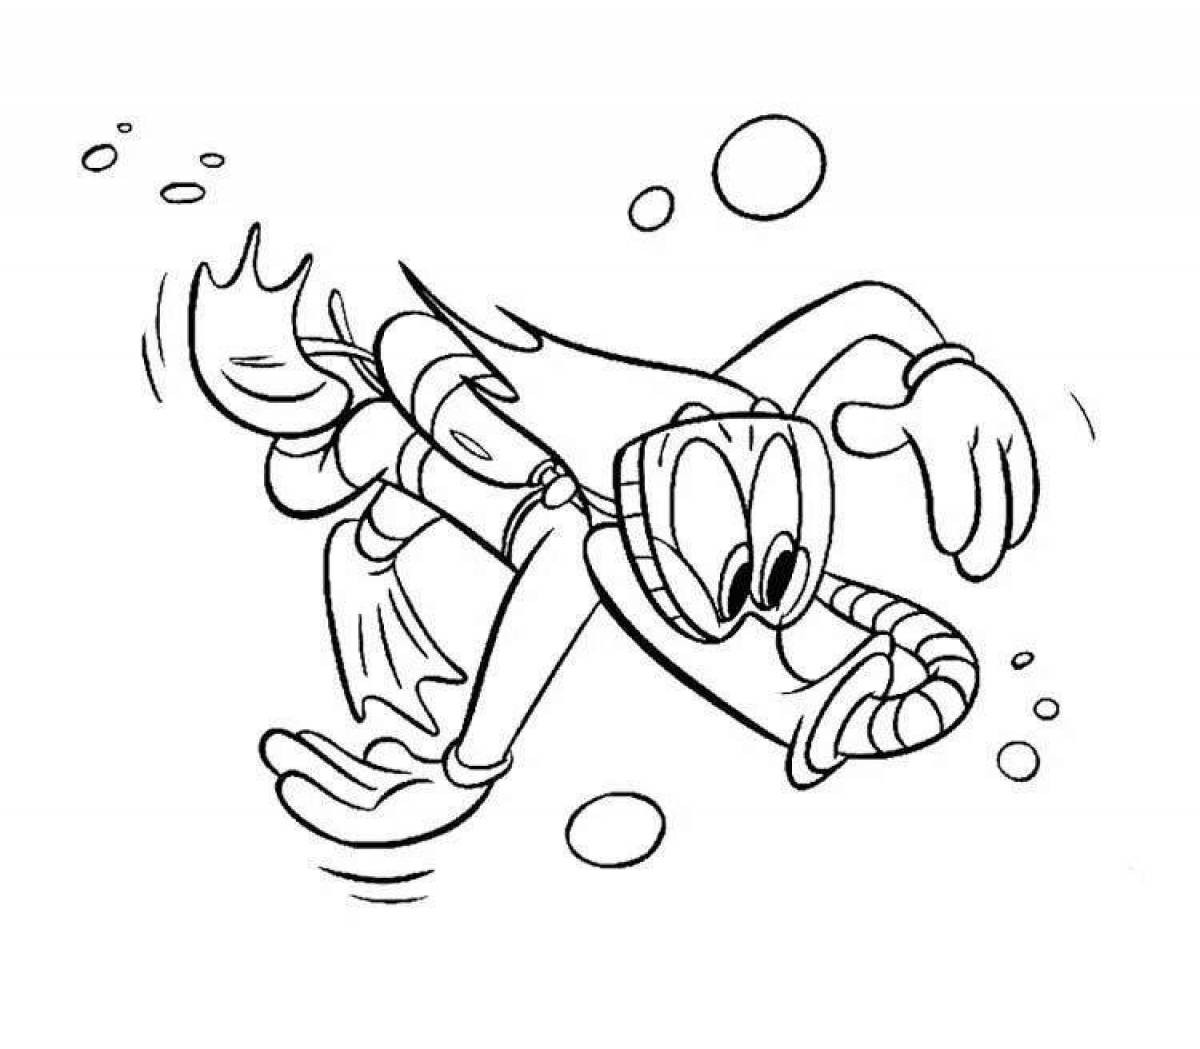 Charming woody woodpecker coloring book